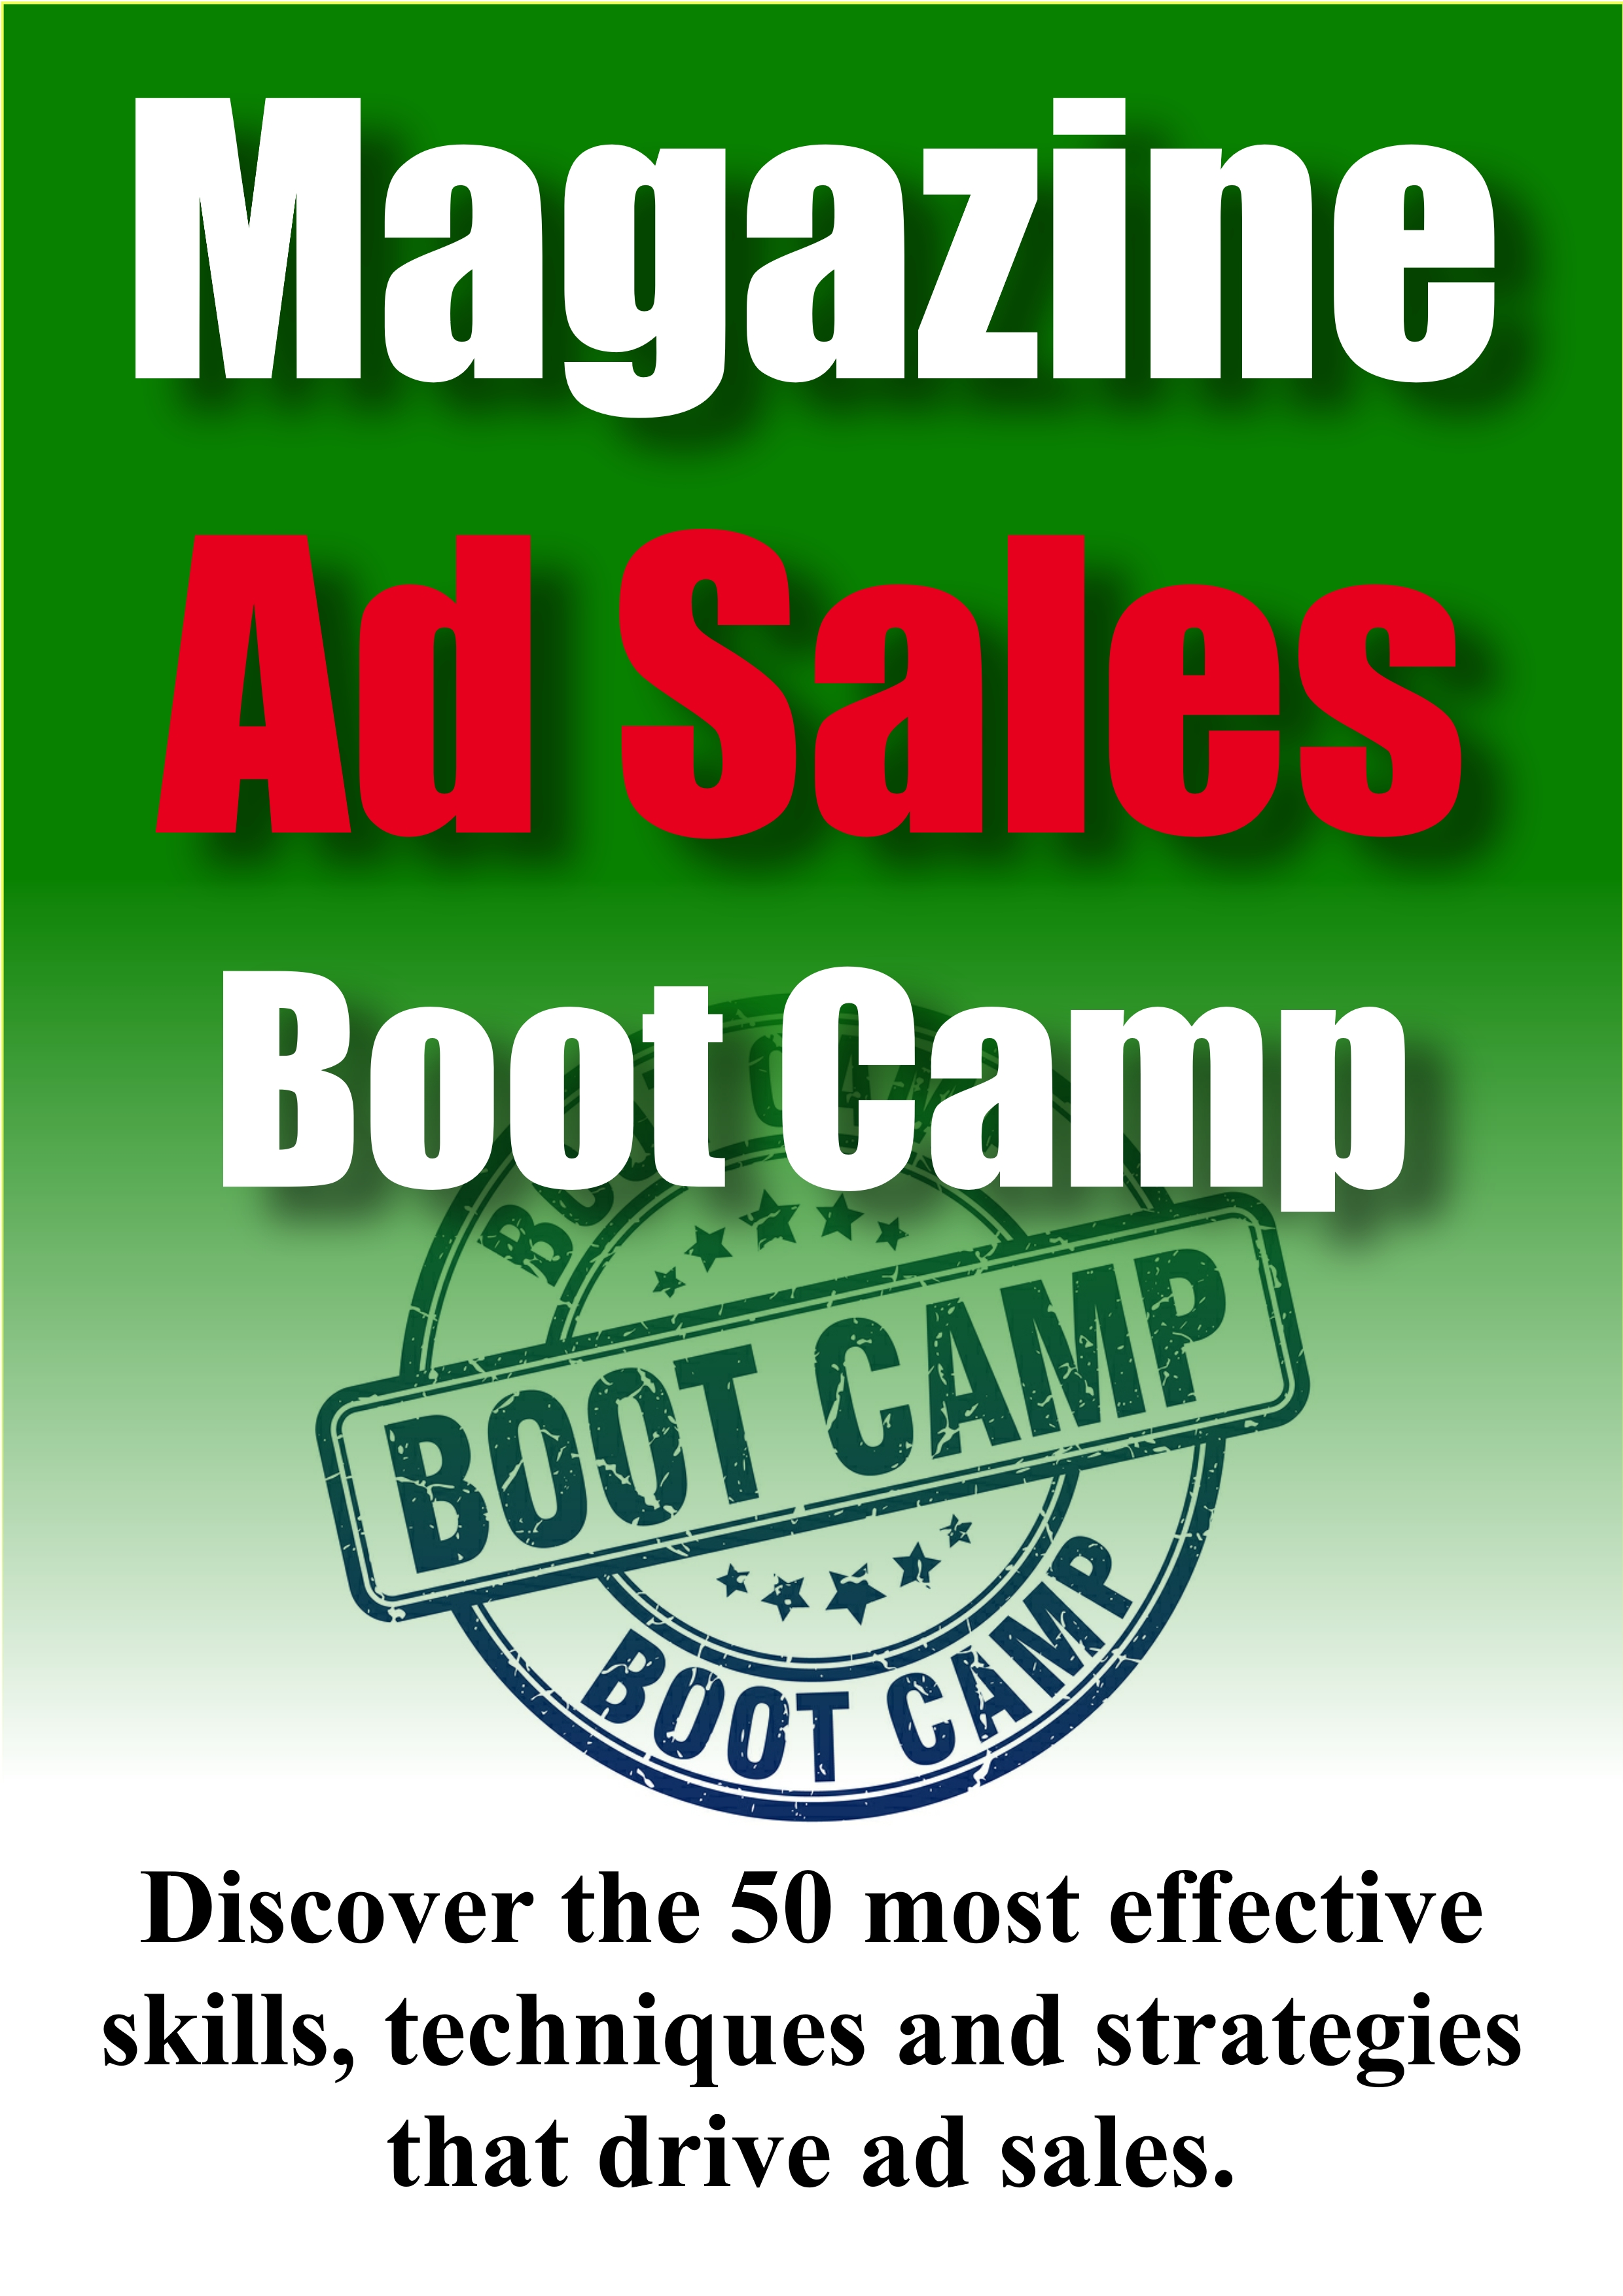 Ad Sales Boot Camp